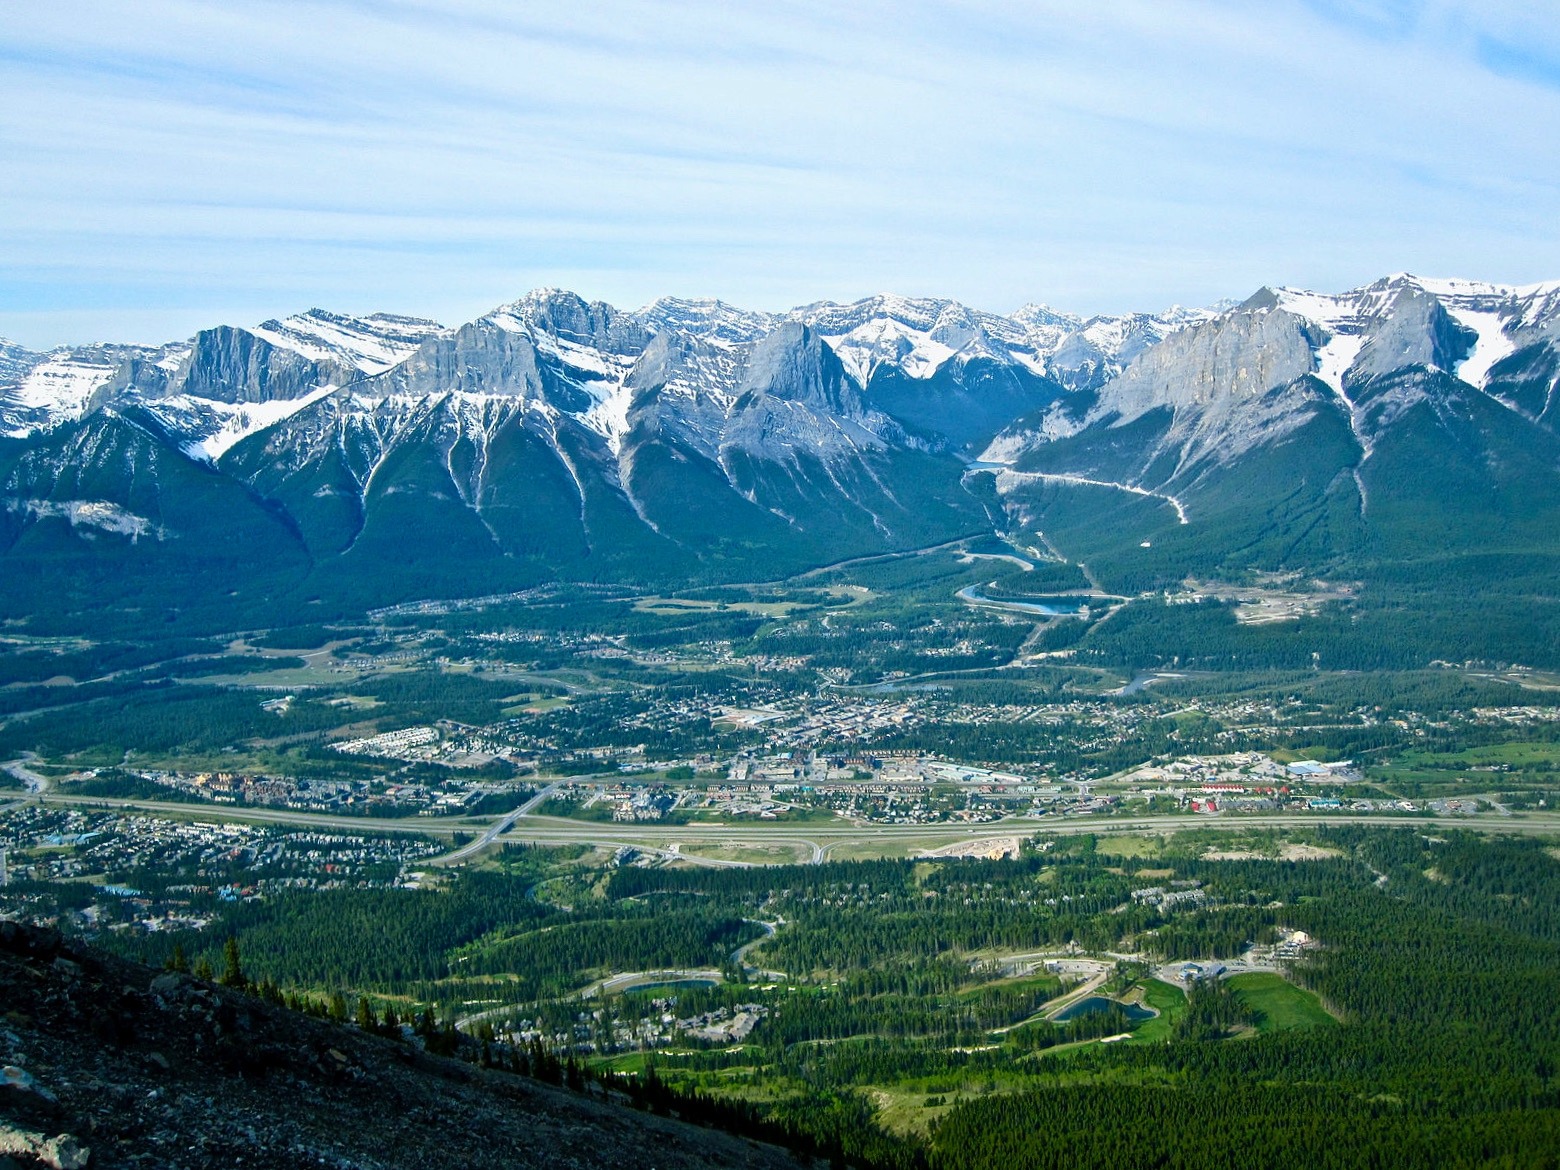 The landscape around Canmore, Alberta, gateway to Banff National Park, is a spaghetti maze of human development built literally upon the places where iconic wildlife migrates. This bustling town could easily be Bozeman, Big Sky or Jackson, Wyo. Photo courtesy Wikipedia Creative License 3.0